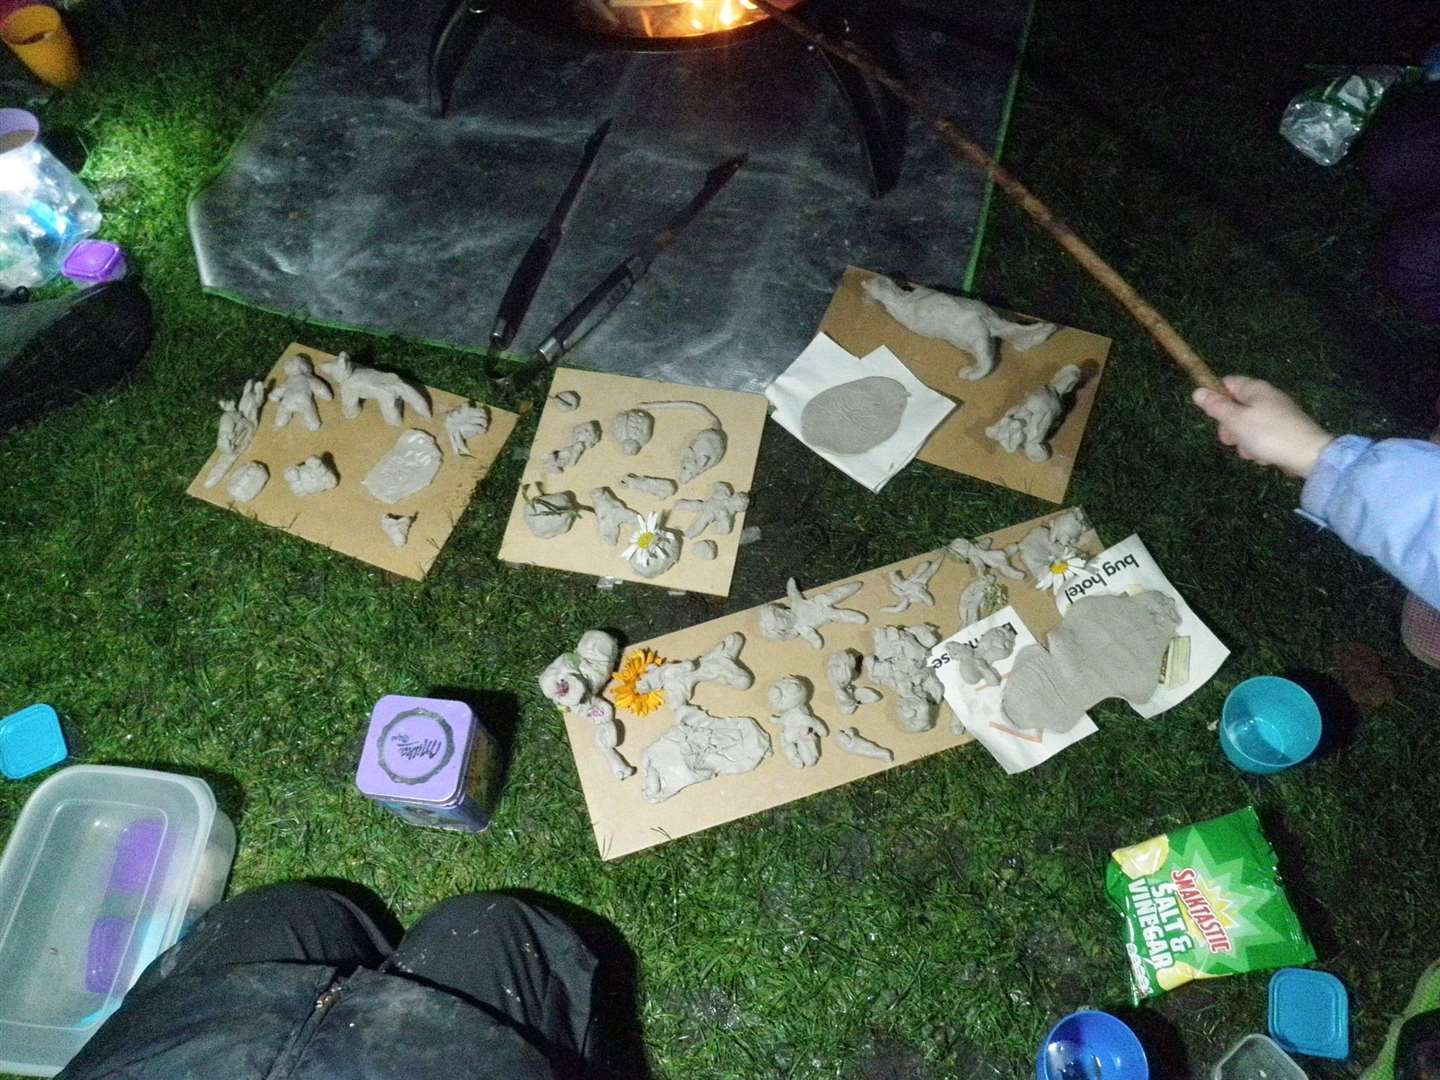 Clay creations were a key part of the Deveron Projects event.